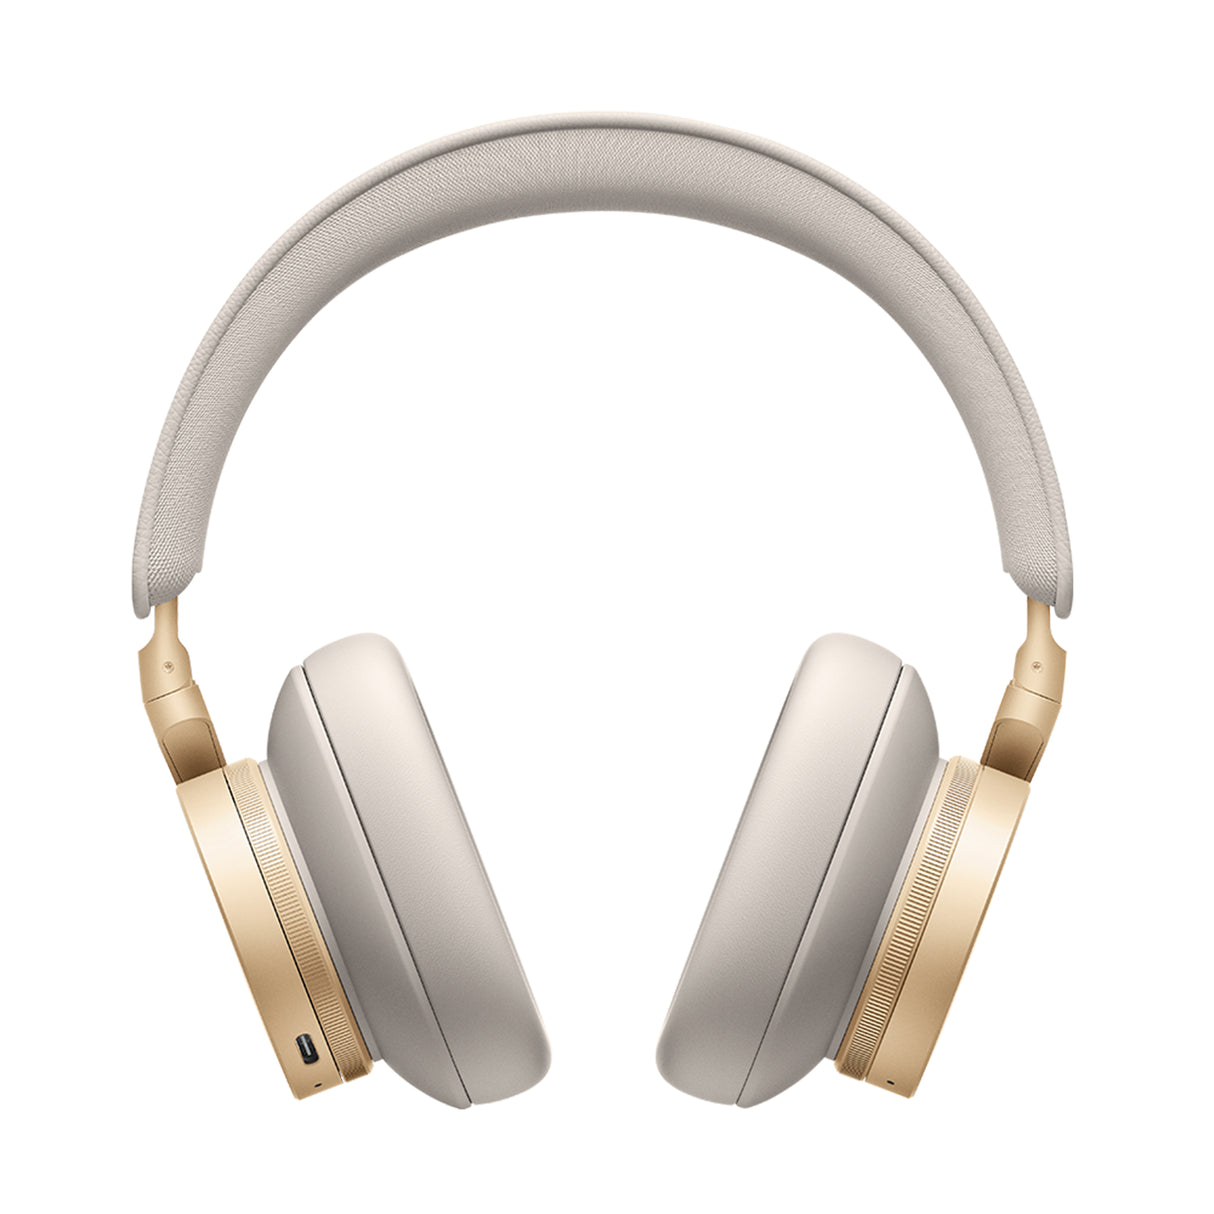 Bang & Olufsen Beoplay H95 -Adaptive Noise Cancellation Wireless Headphones